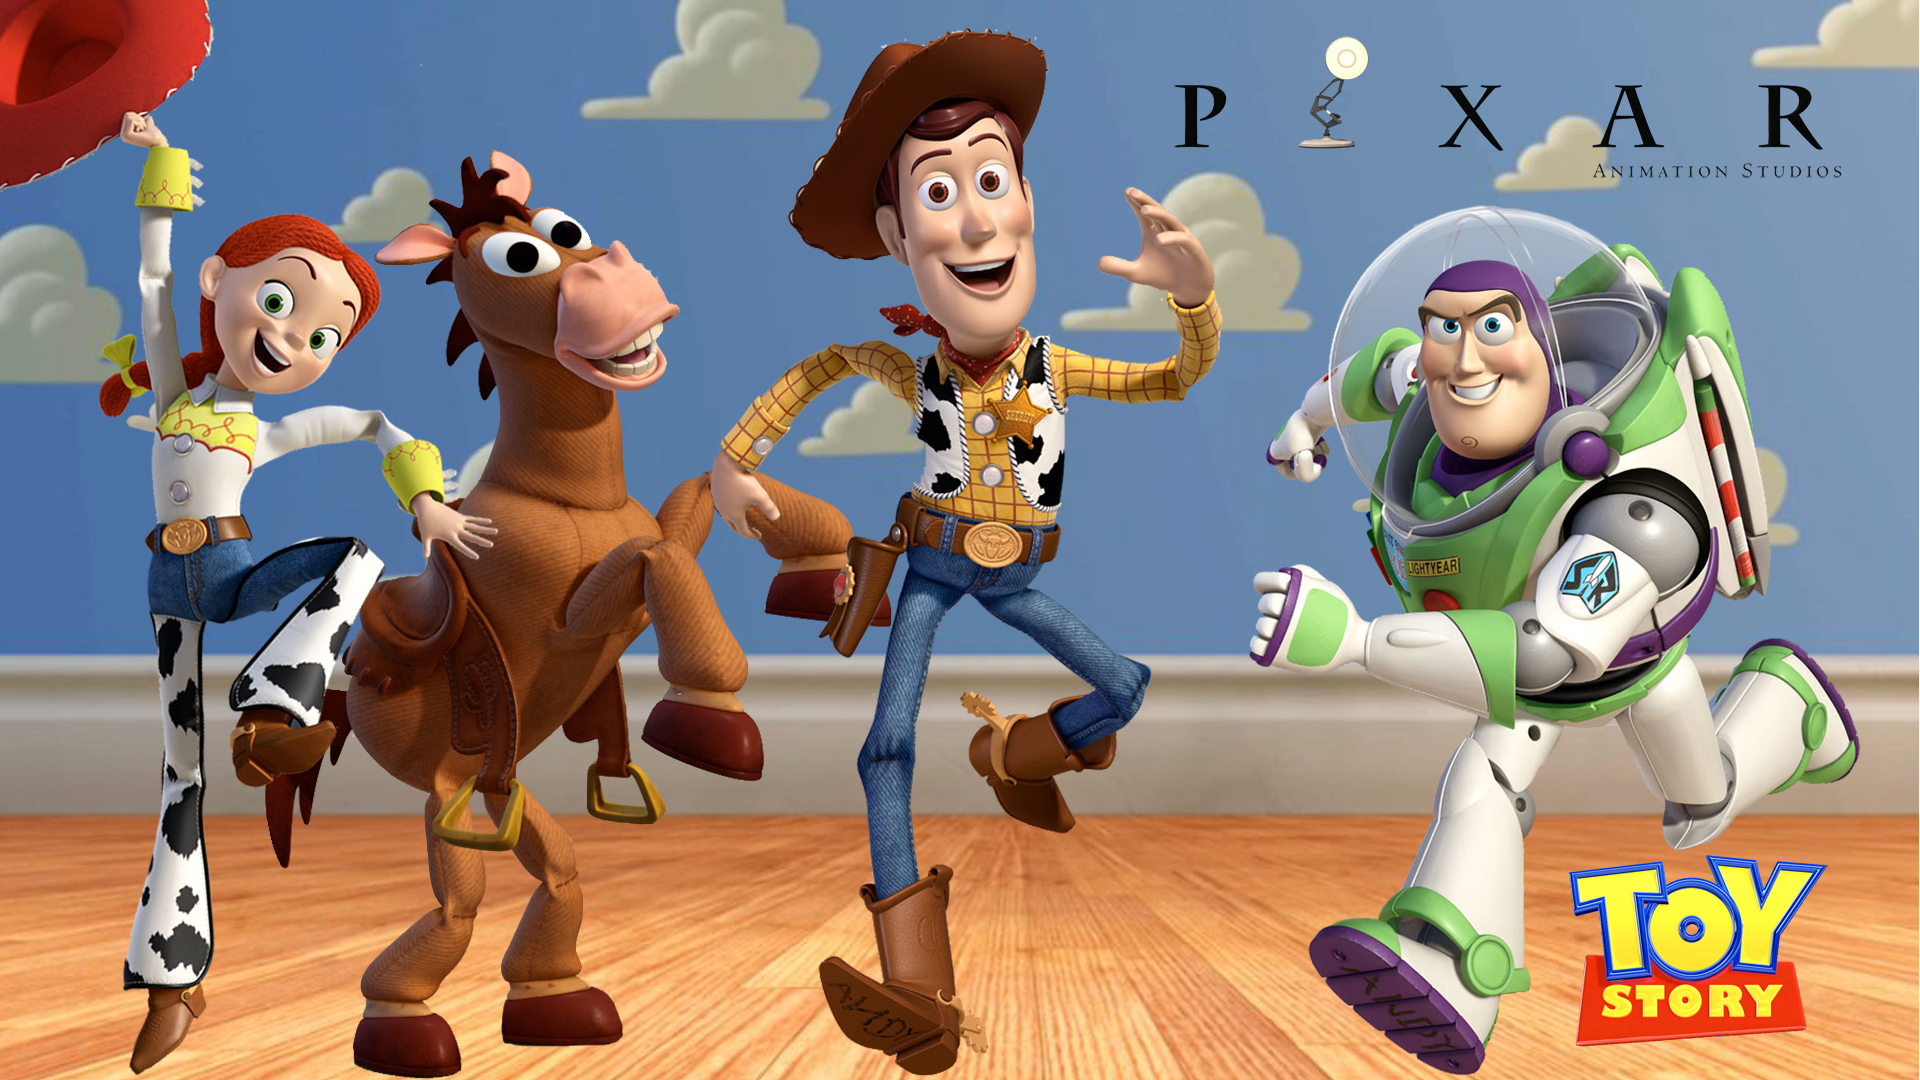 Toy Story 4 HD wallpaper free download